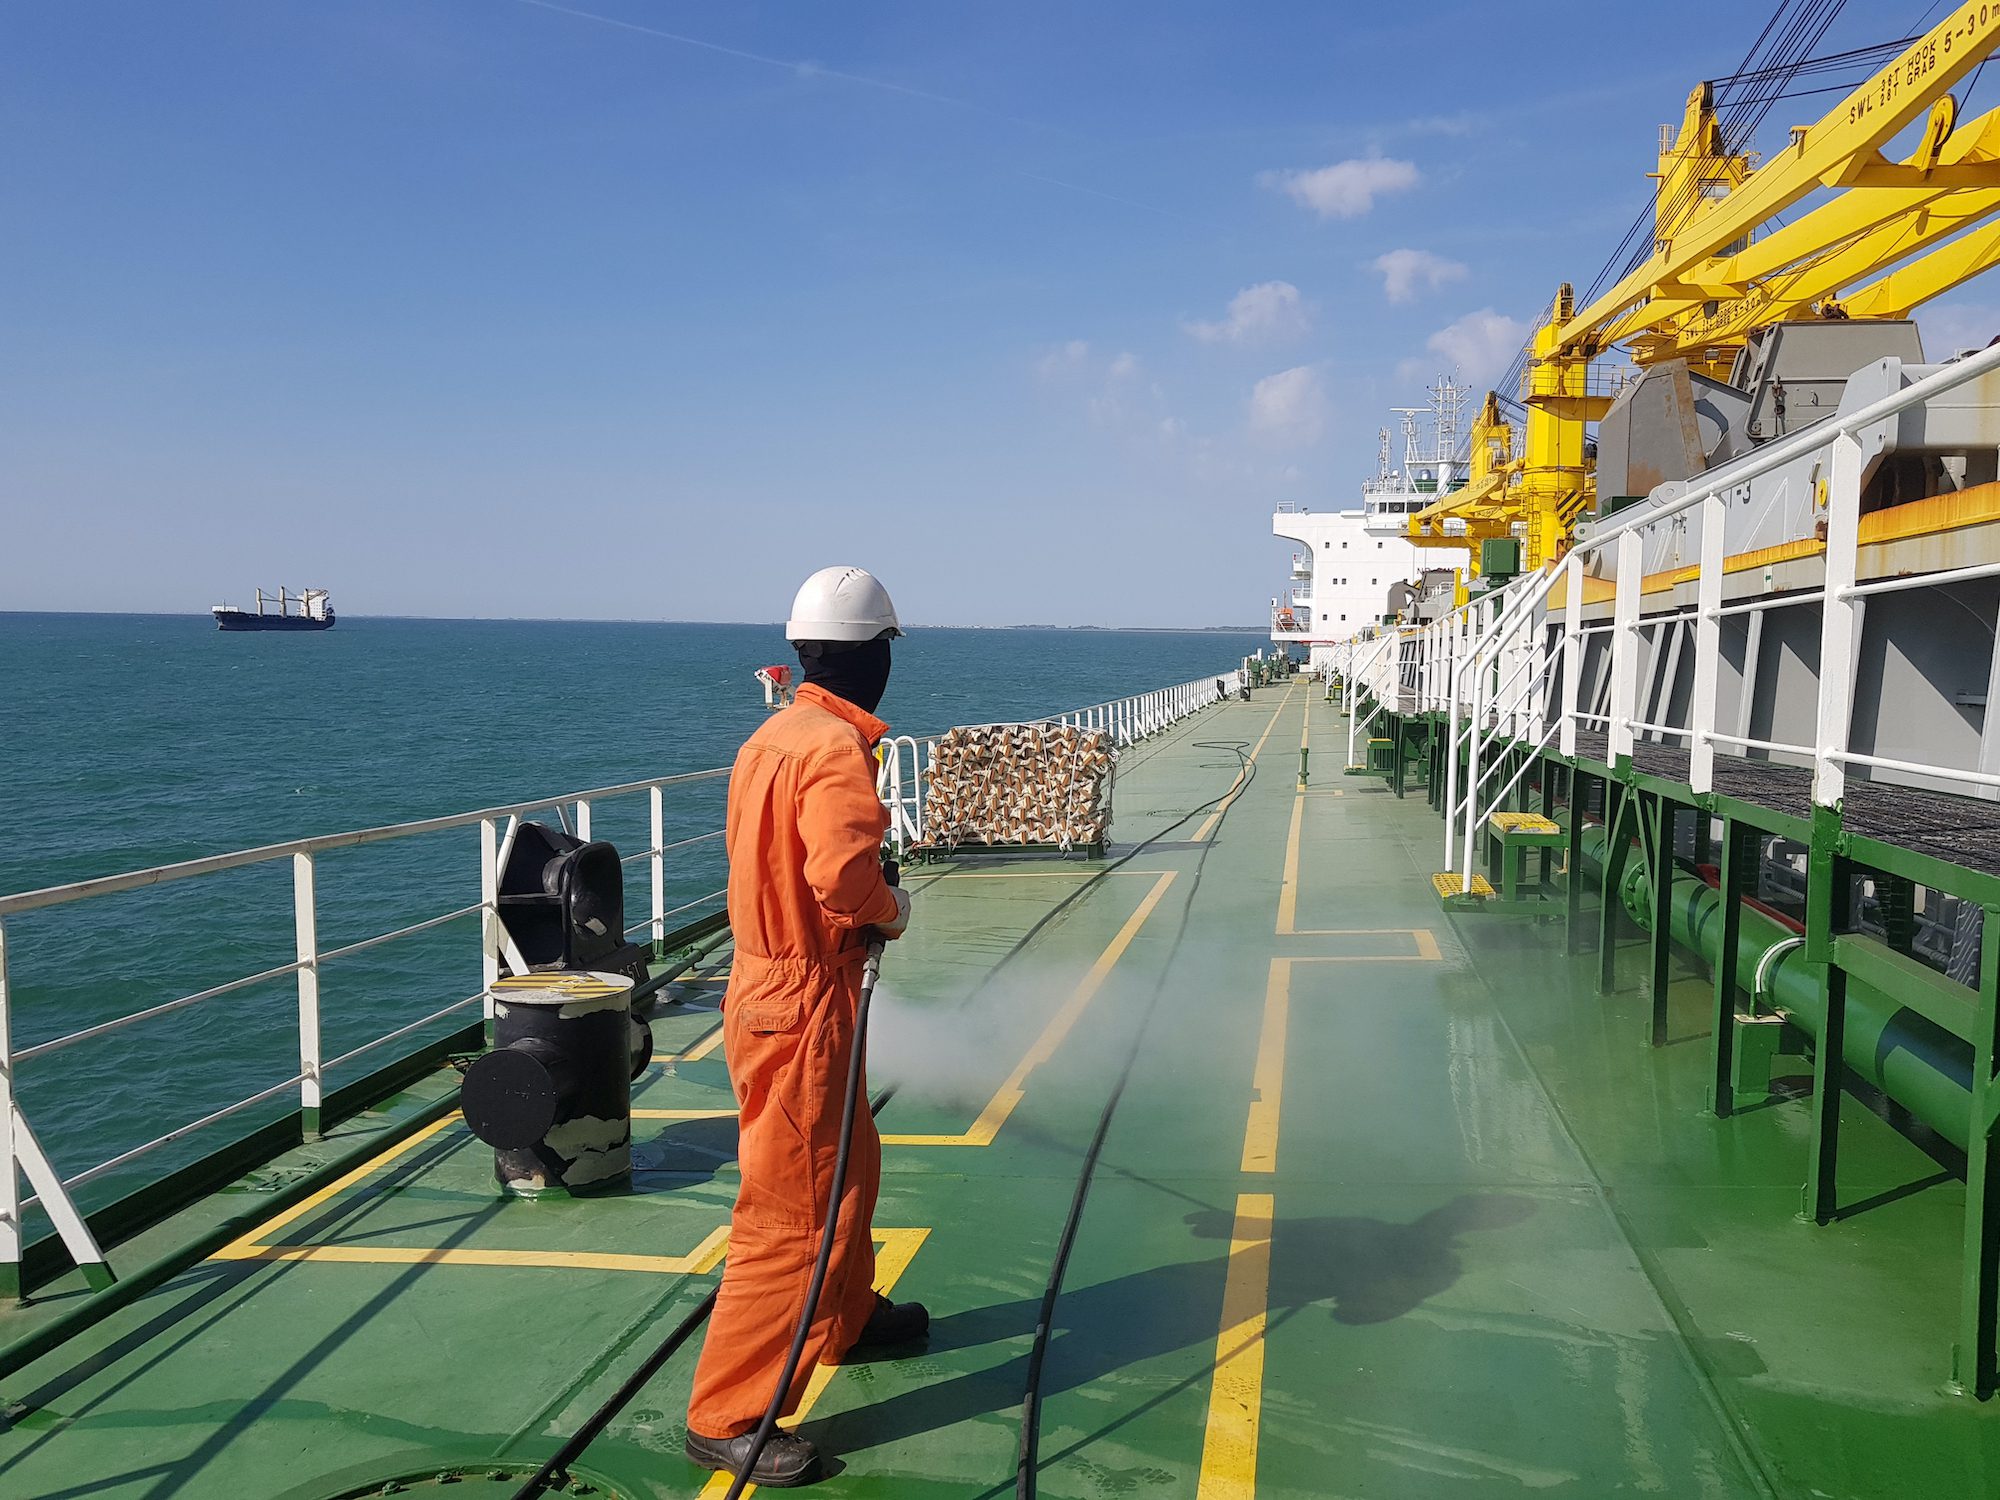 A seafarer working on the deck of a ship